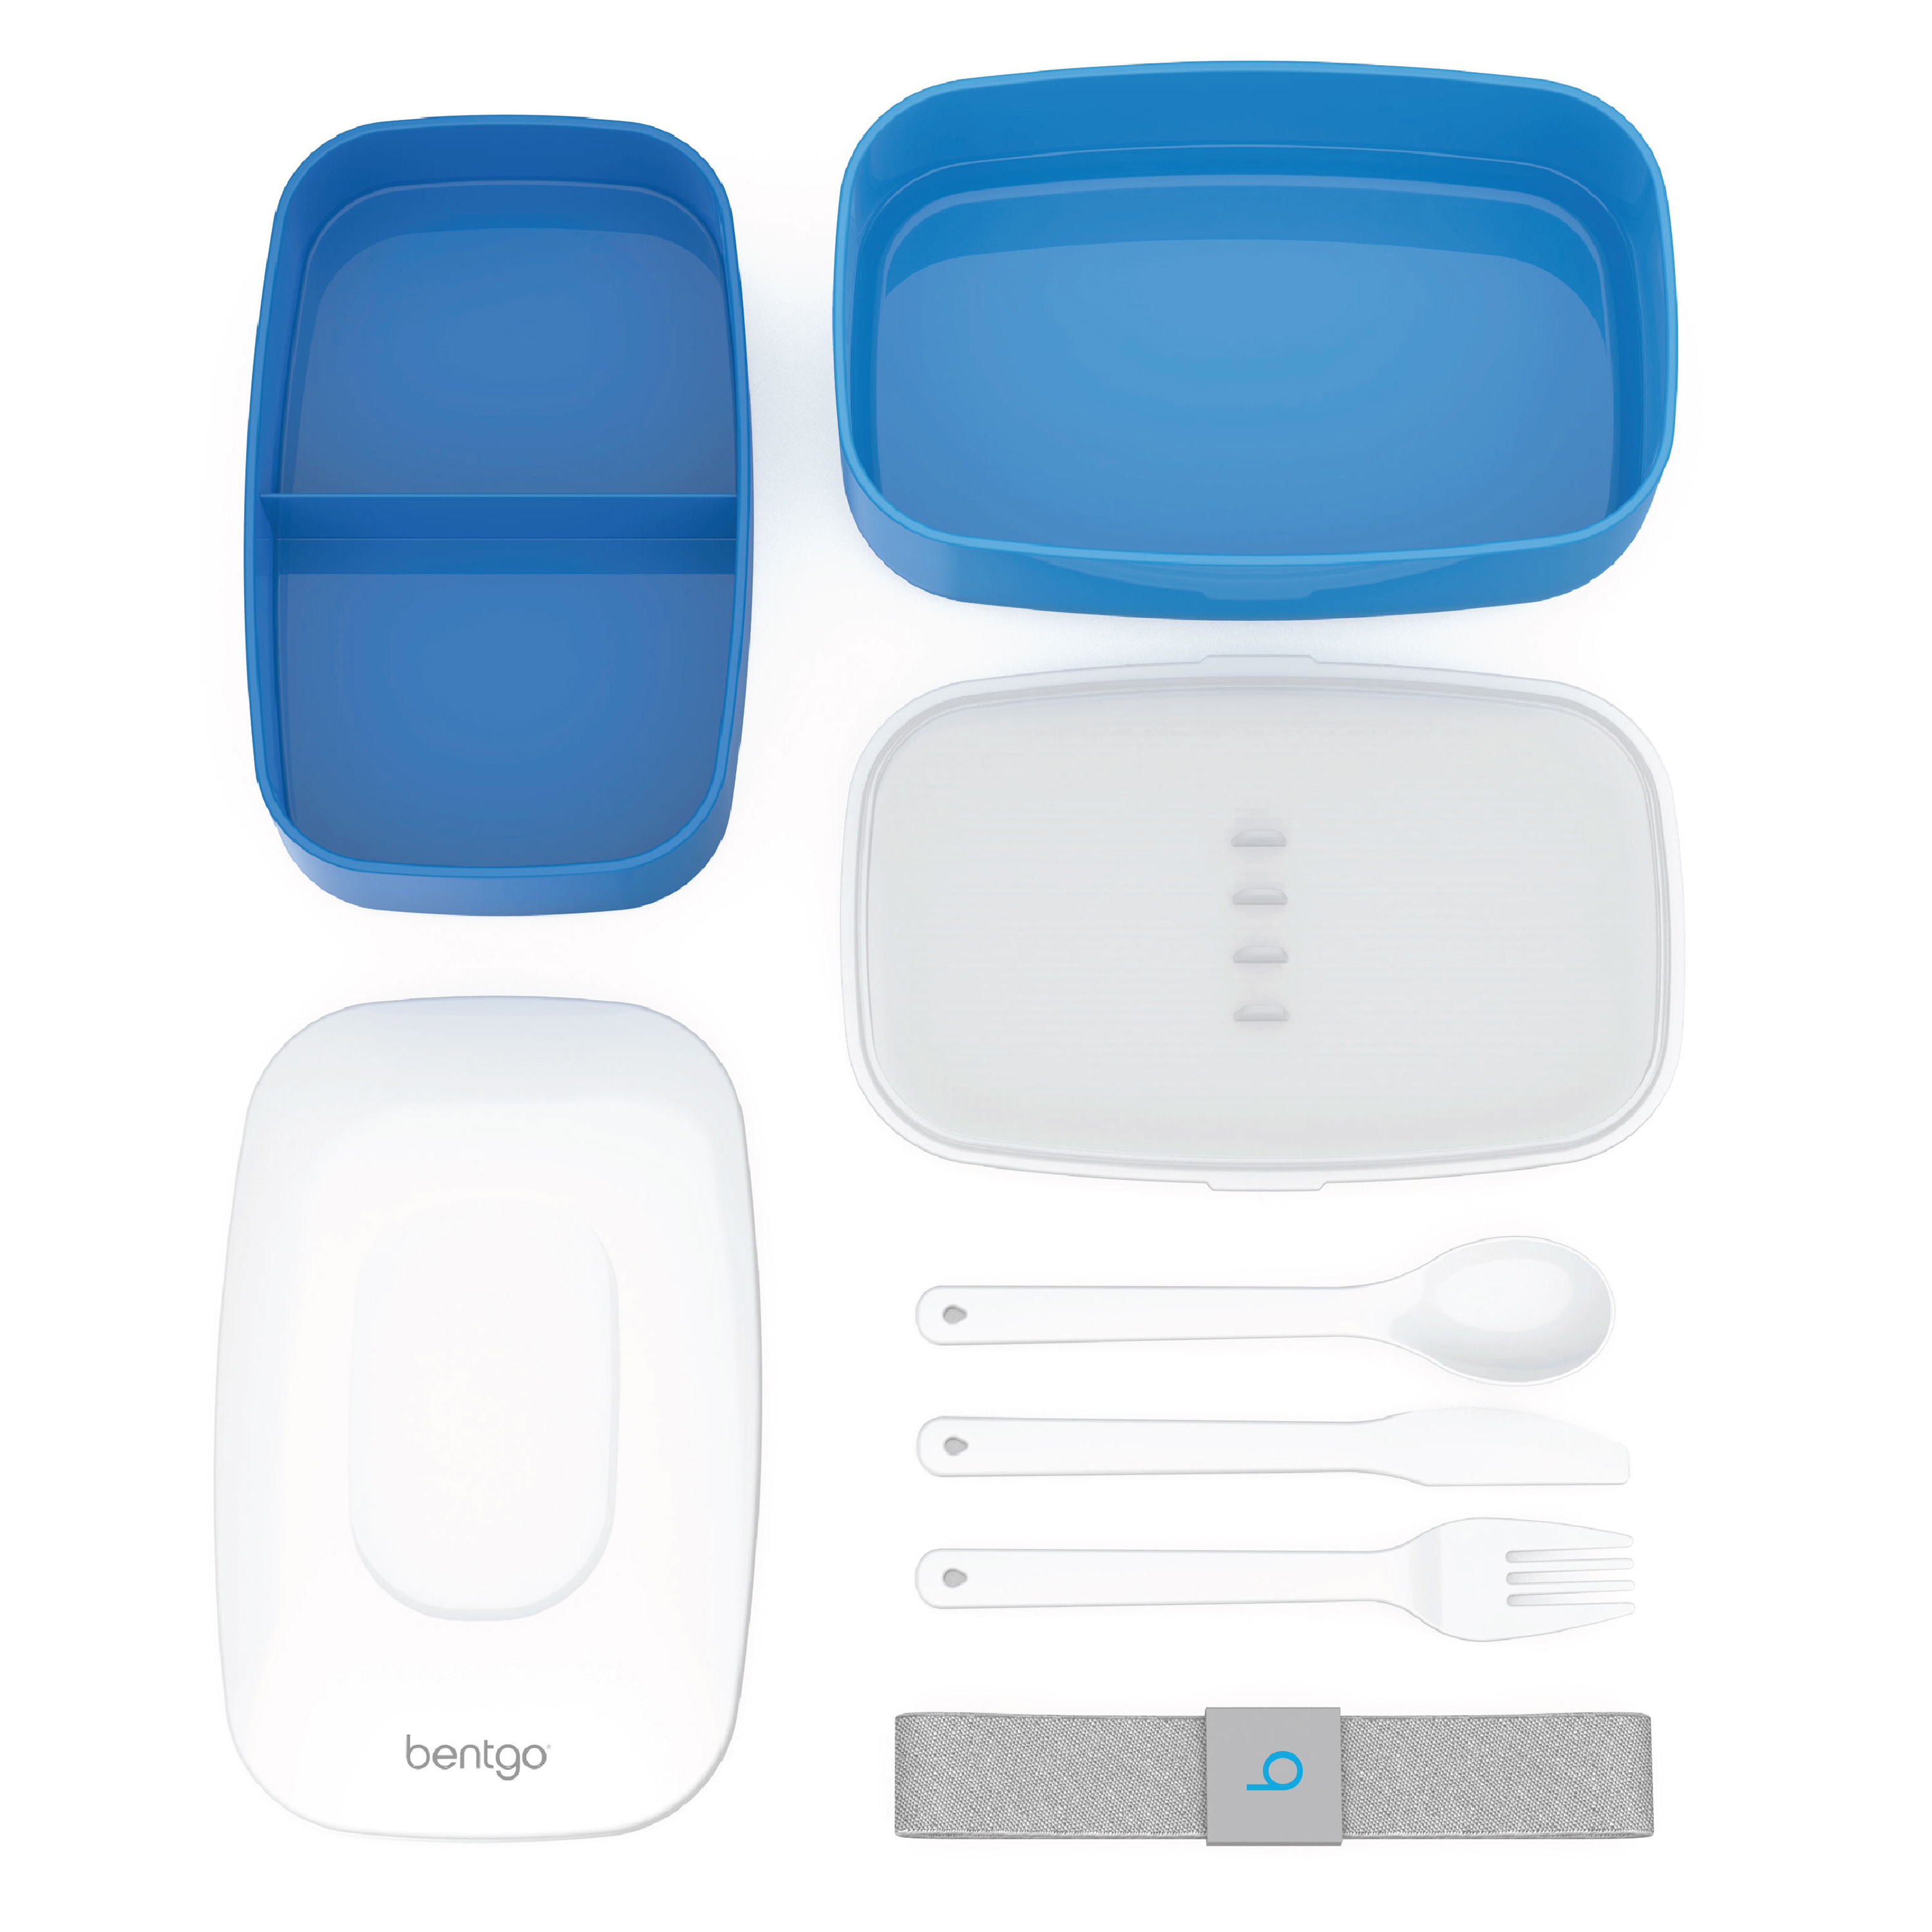 Bentgo Classic (Blue) - All-in-One Stackable Lunch Box Solution - Sleek and Modern Bento Box Design Includes 2 Stackable Containers, Built-in Plastic Silverware, and Sealing Strap - image 2 of 5